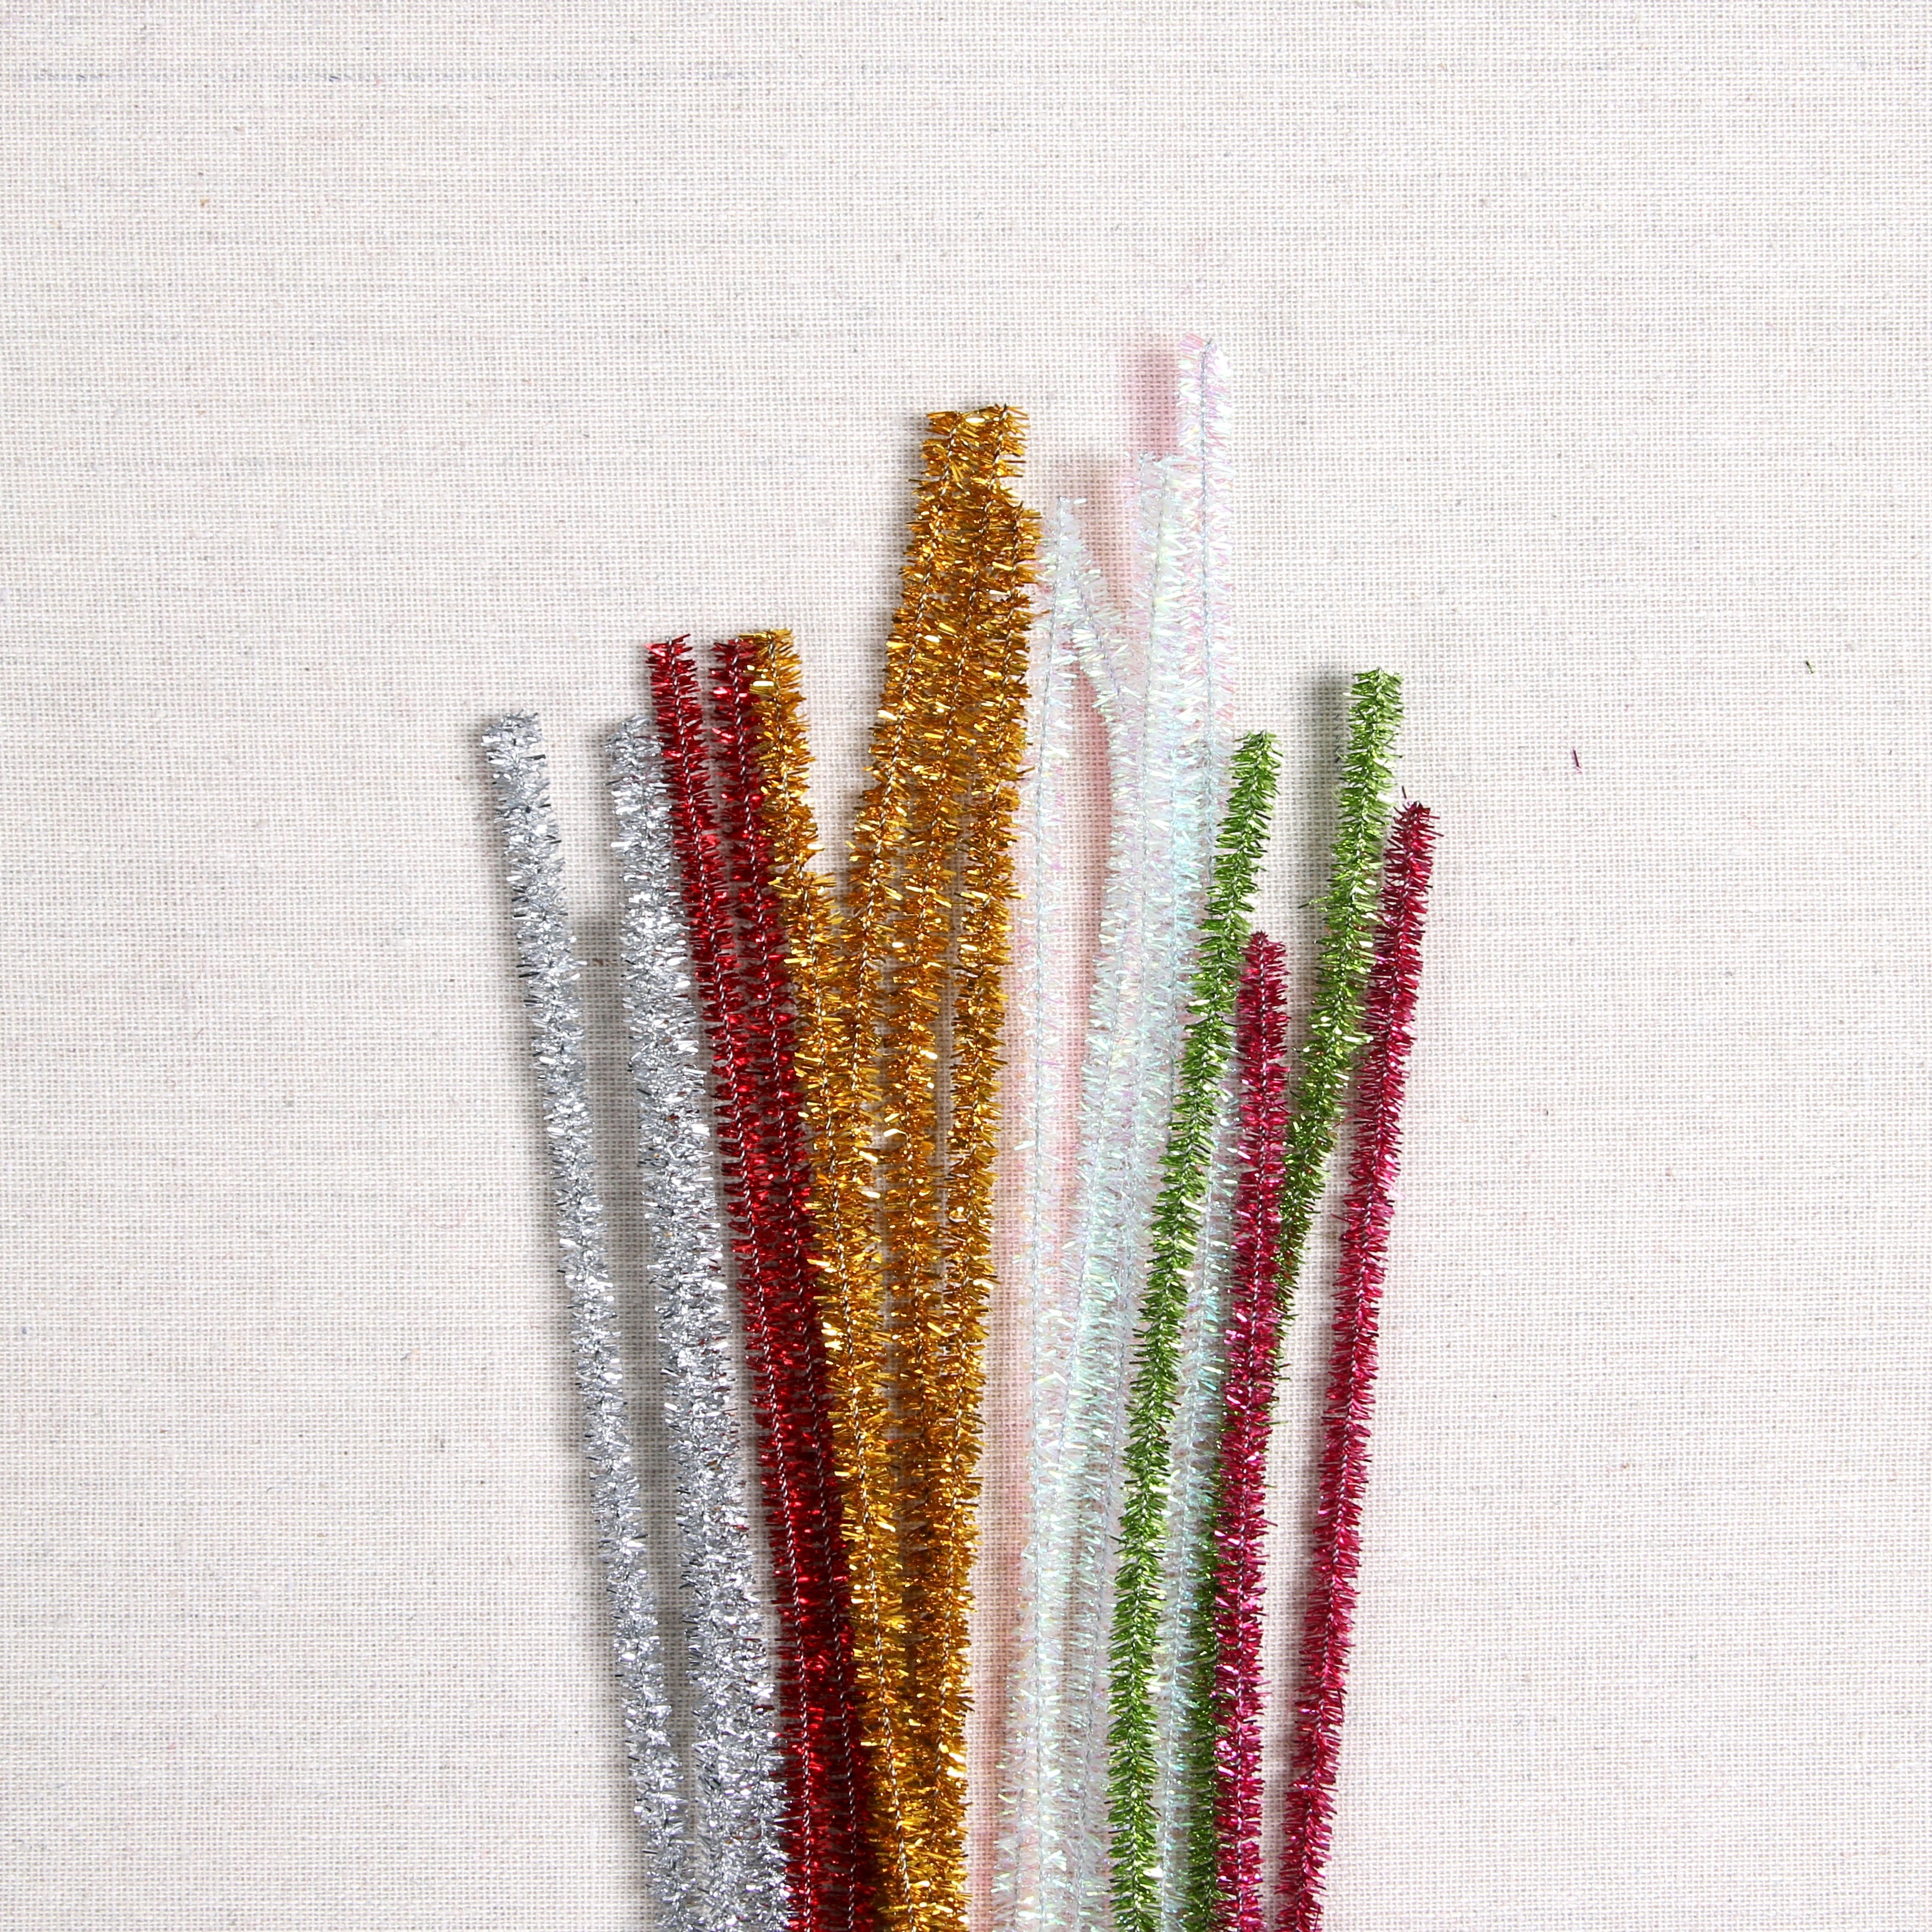 100 Gold and Silver Tinsel Pipe Cleaners for Crafts Stems 30cm x